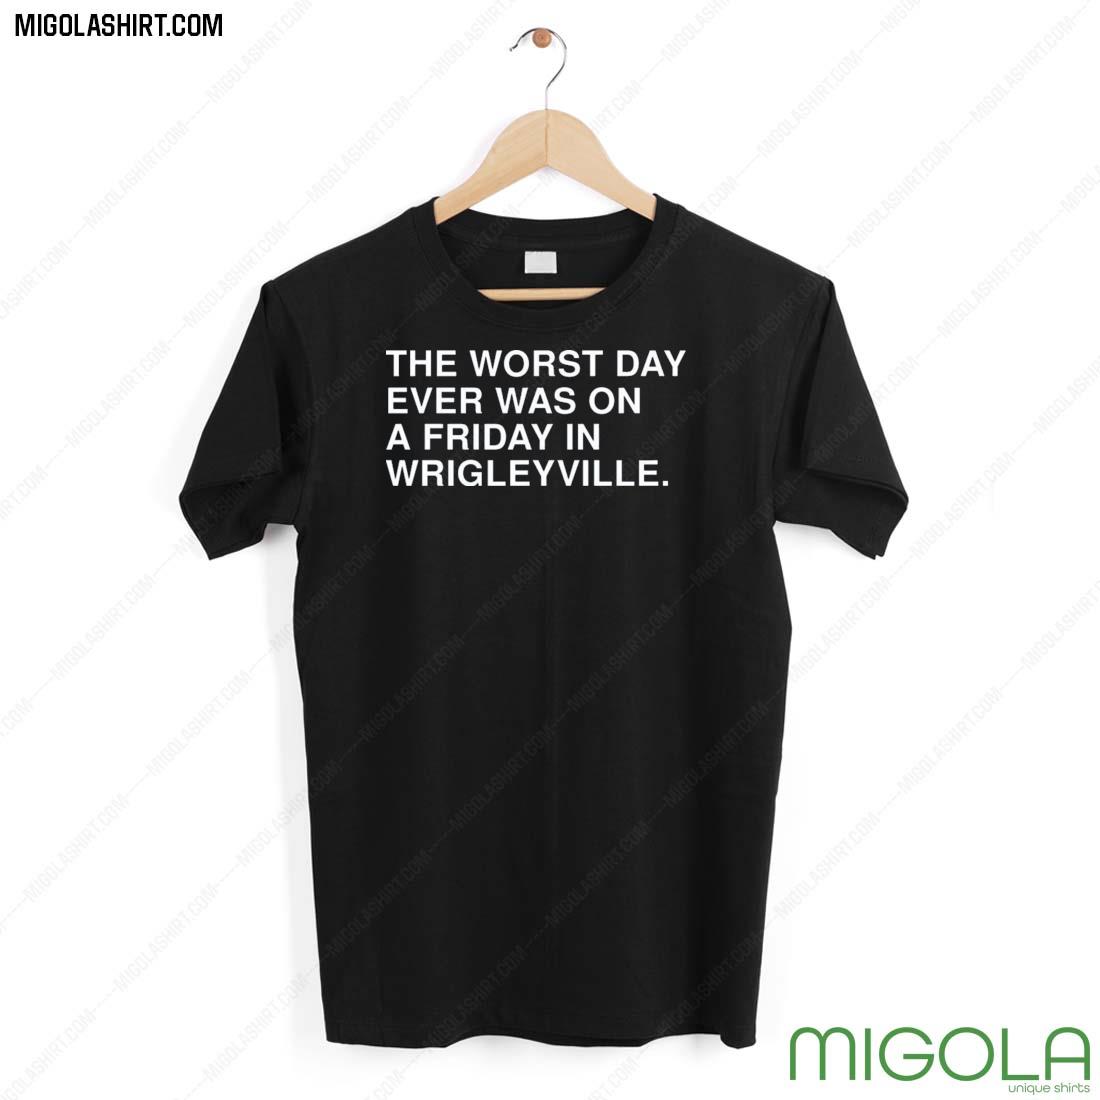 The Worst Day Ever Was On A Friday In Wrigleyville Shirt Obvious Shirts